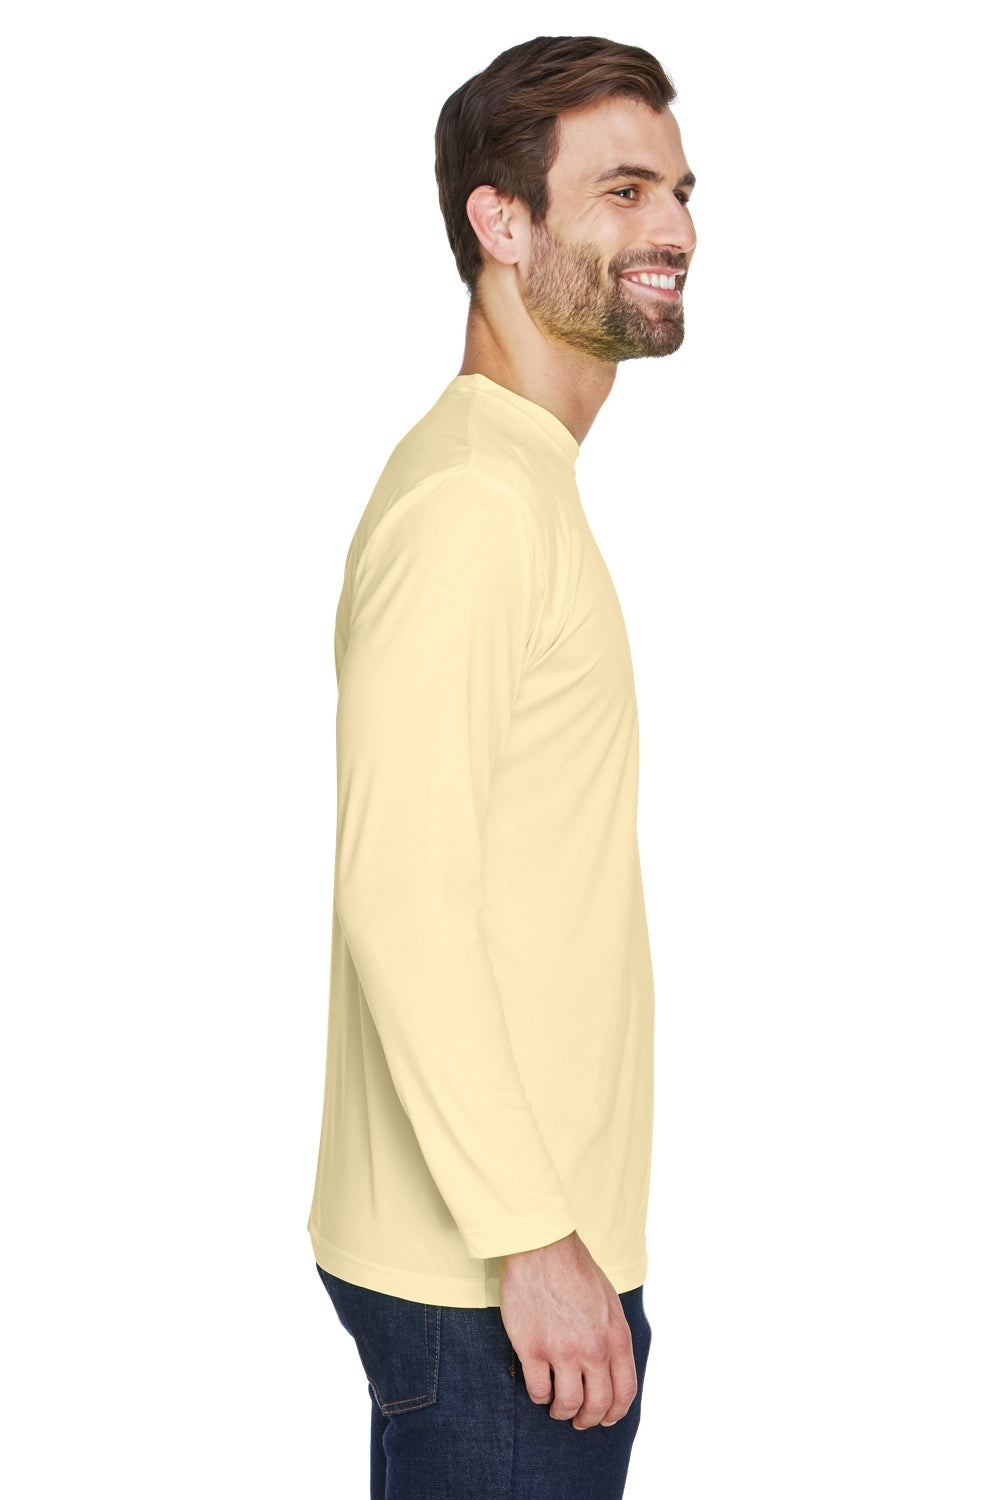 UltraClub 8422 Mens Cool & Dry Performance Moisture Wicking Long Sleeve Crewneck T-Shirt Butter Yellow Side